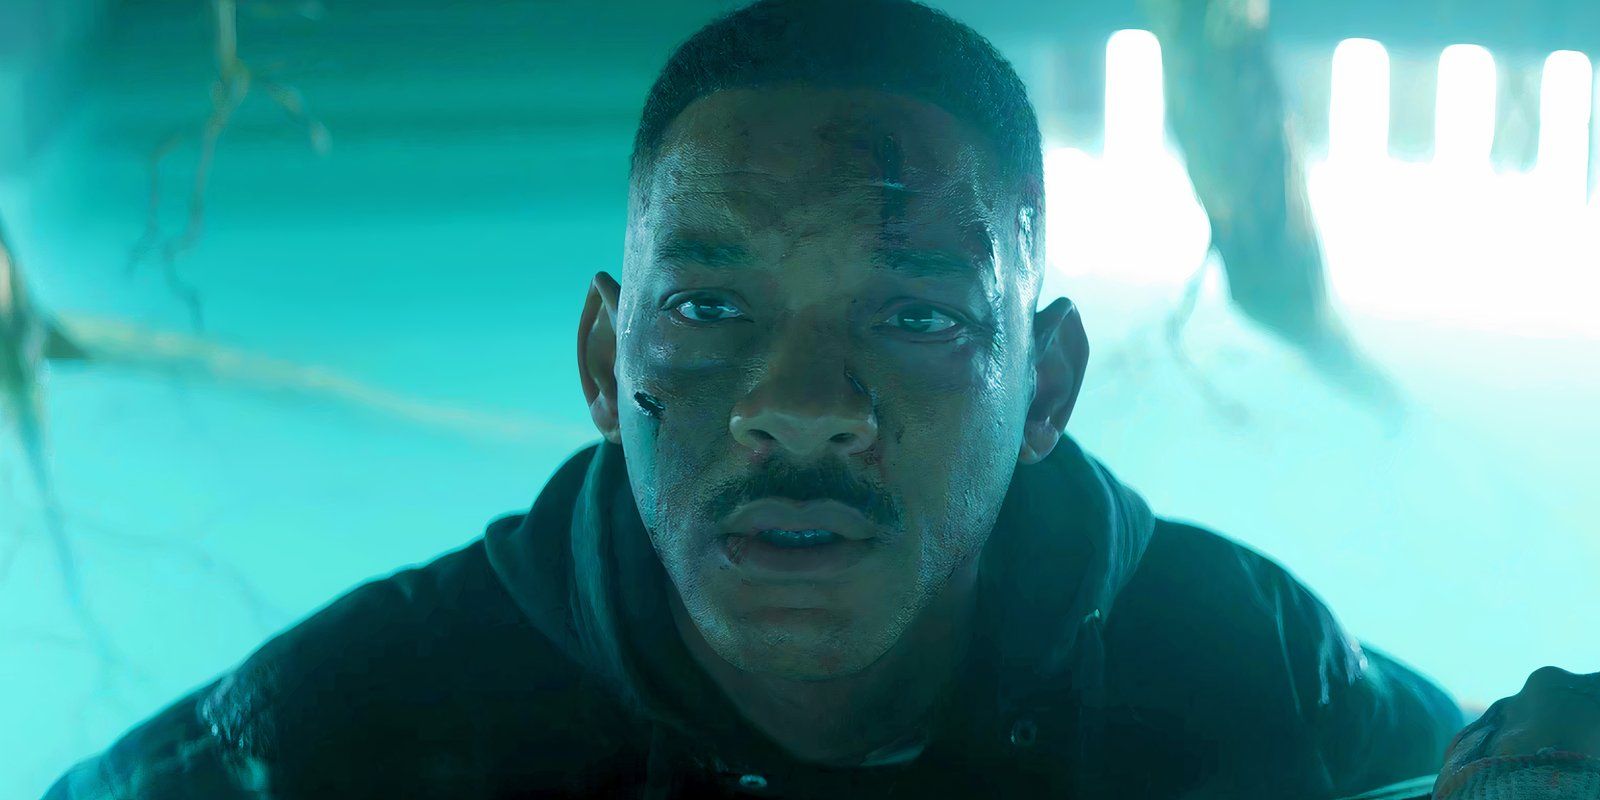 Will Smith as Daryl Ward in Bright